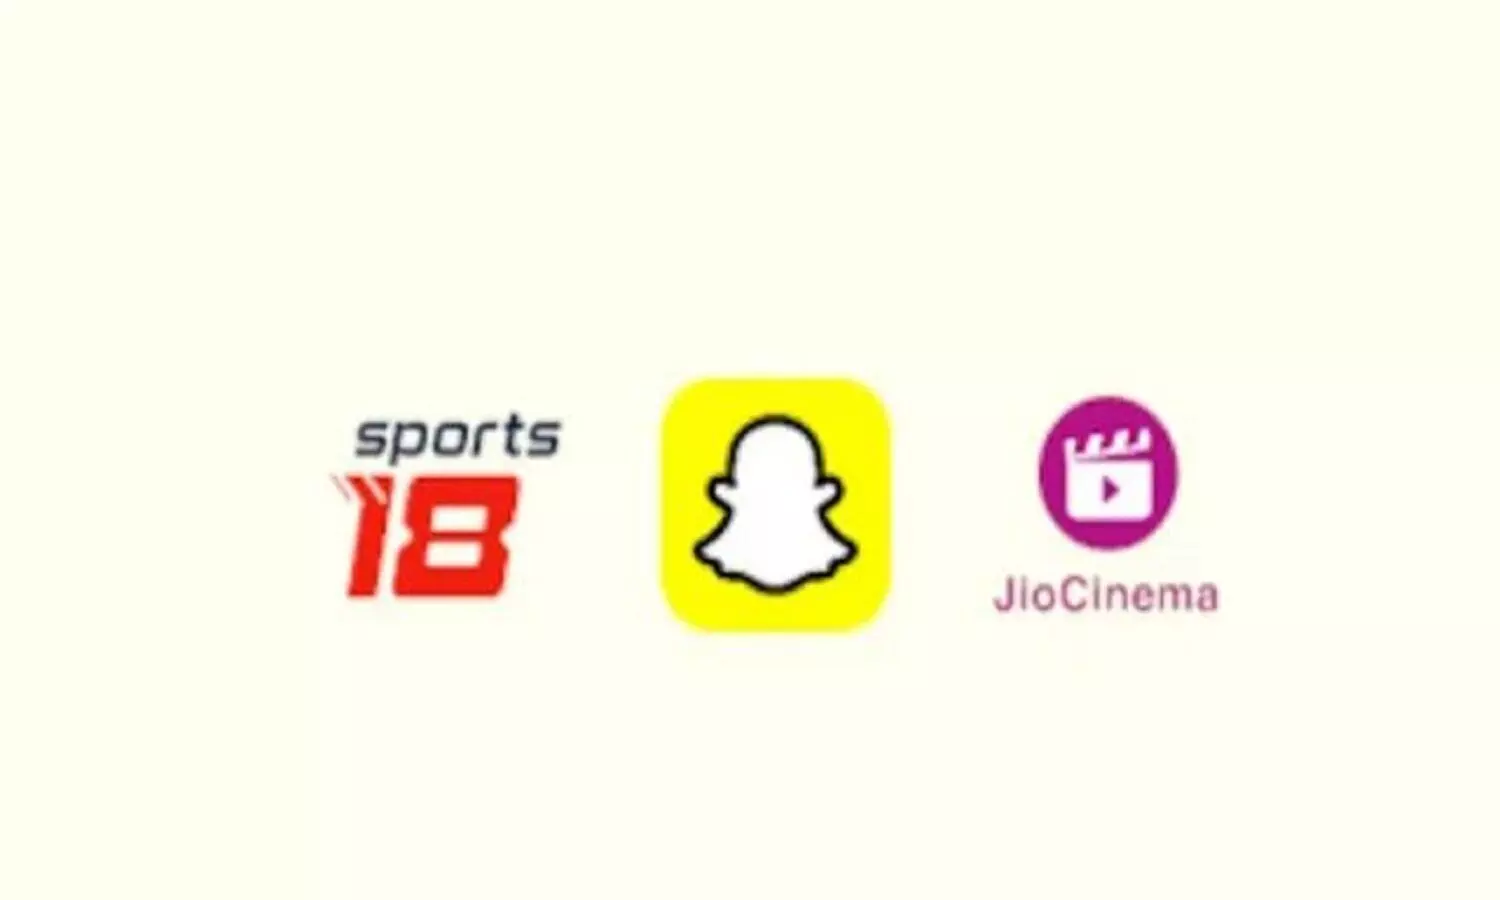 Viacom18 Sports announces partnership with Snap for the FIFA World Cup Qatar 2022